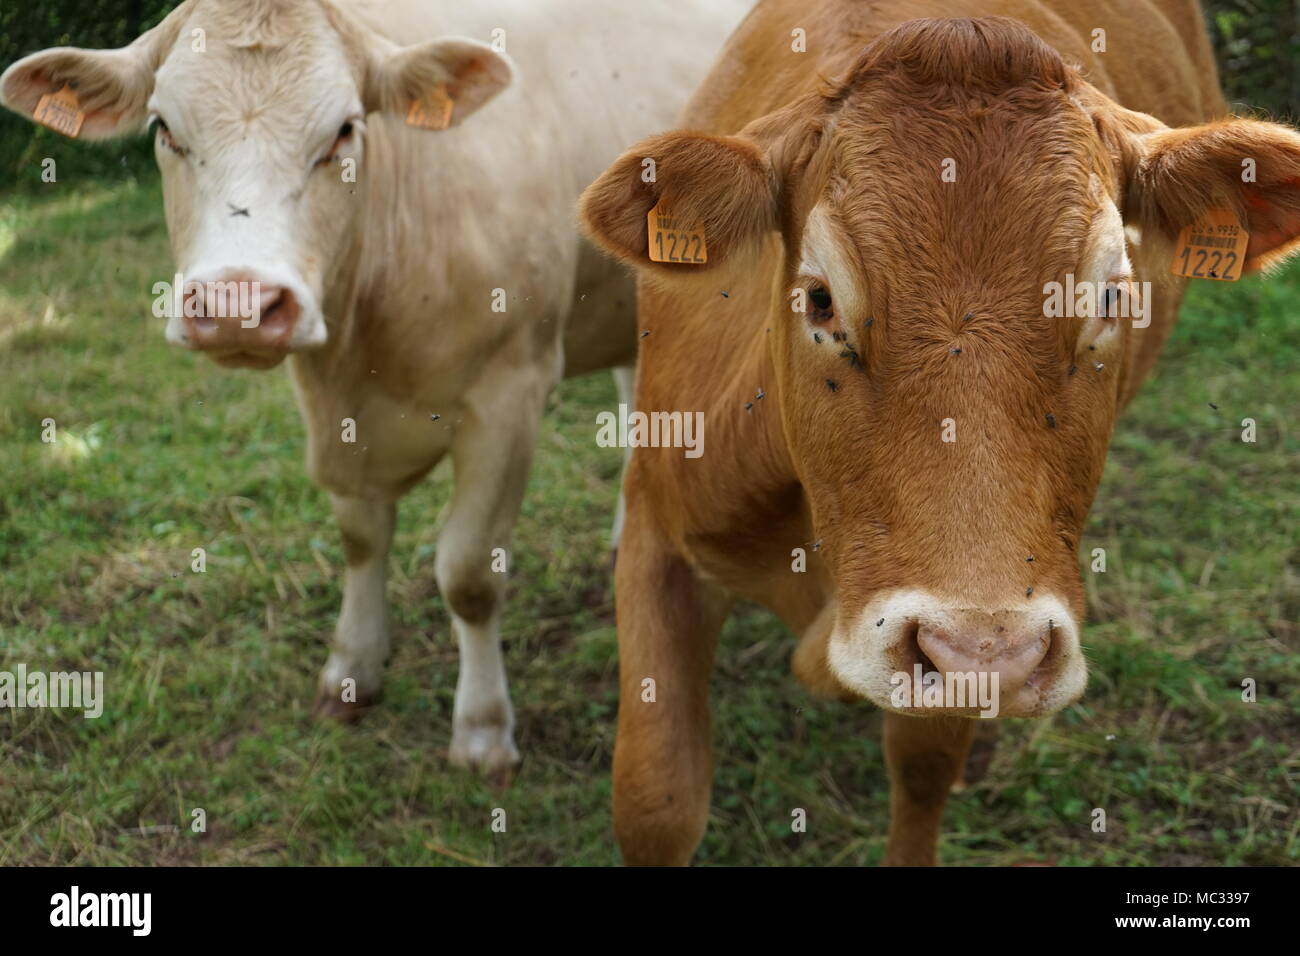 Brown and White Cows out at Pasture, Germany Stock Photo